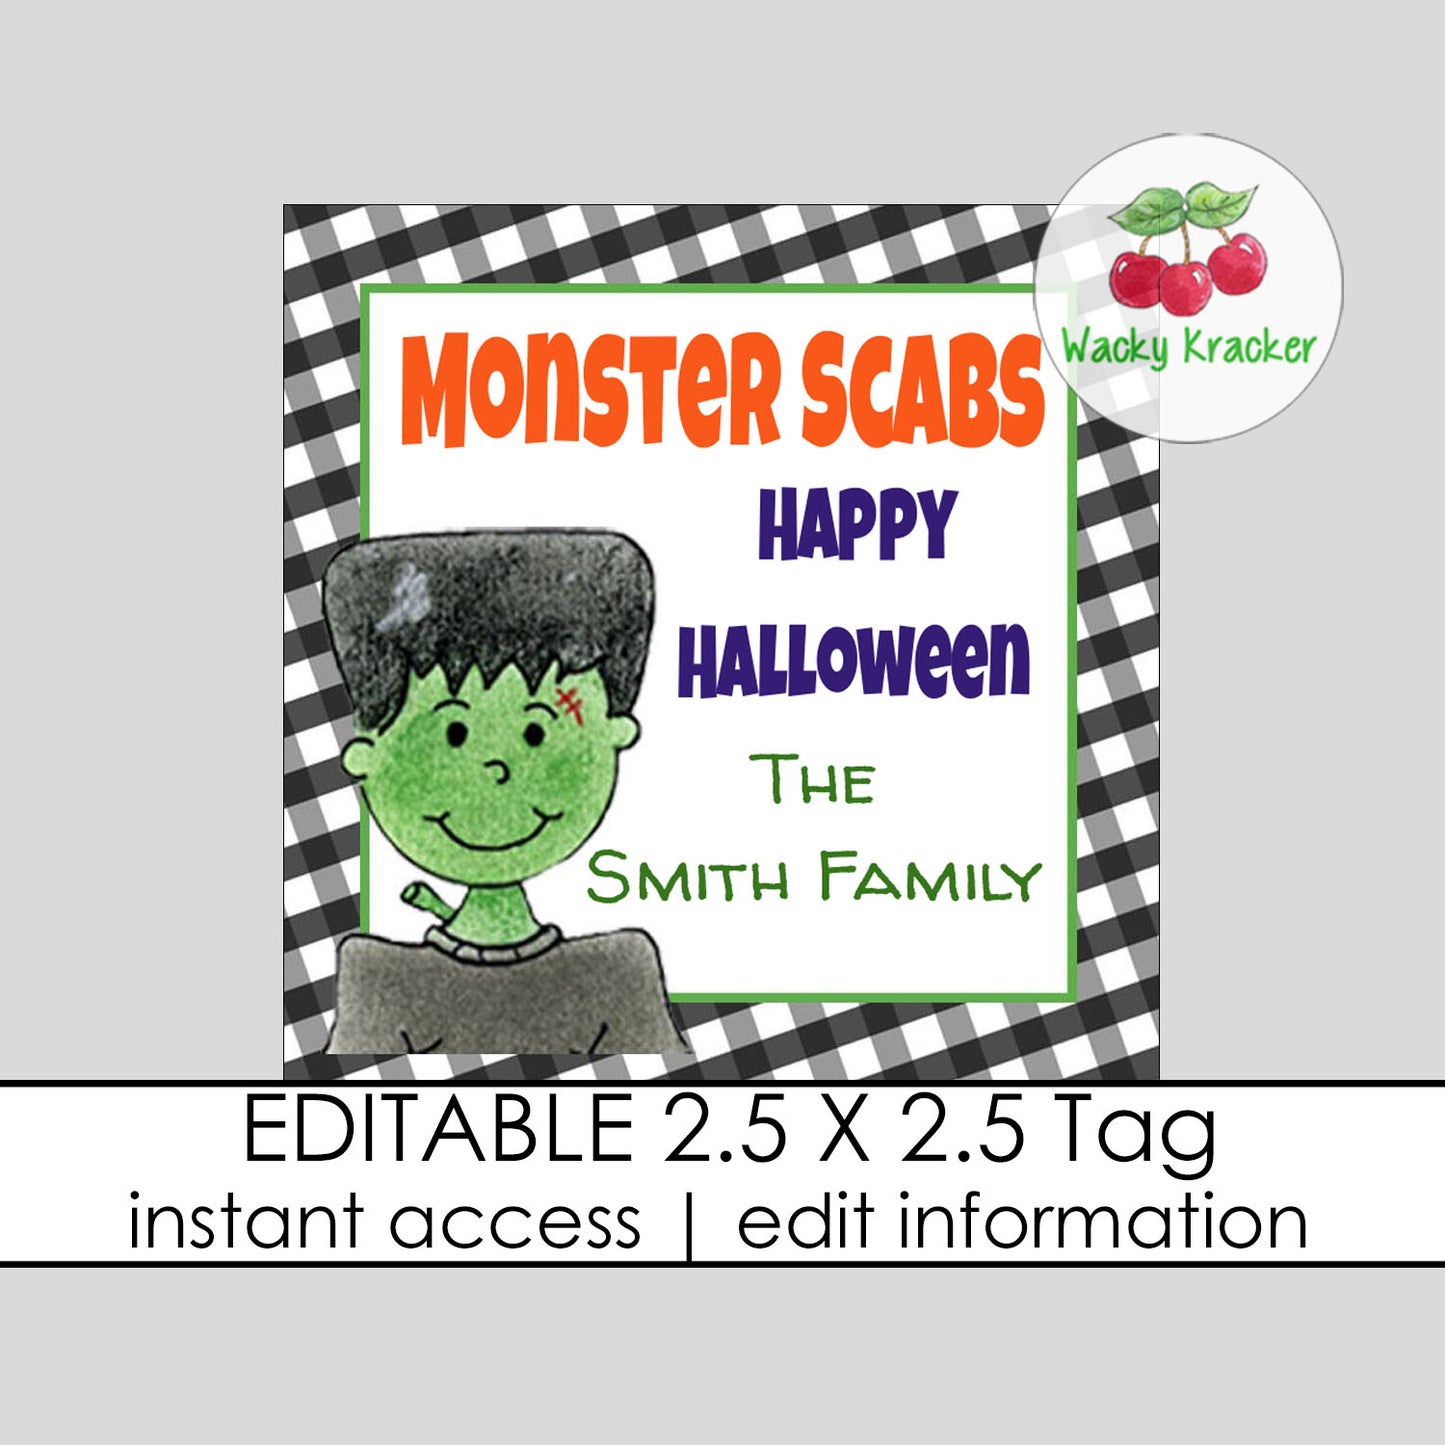 Monster Scabs Gift Tag